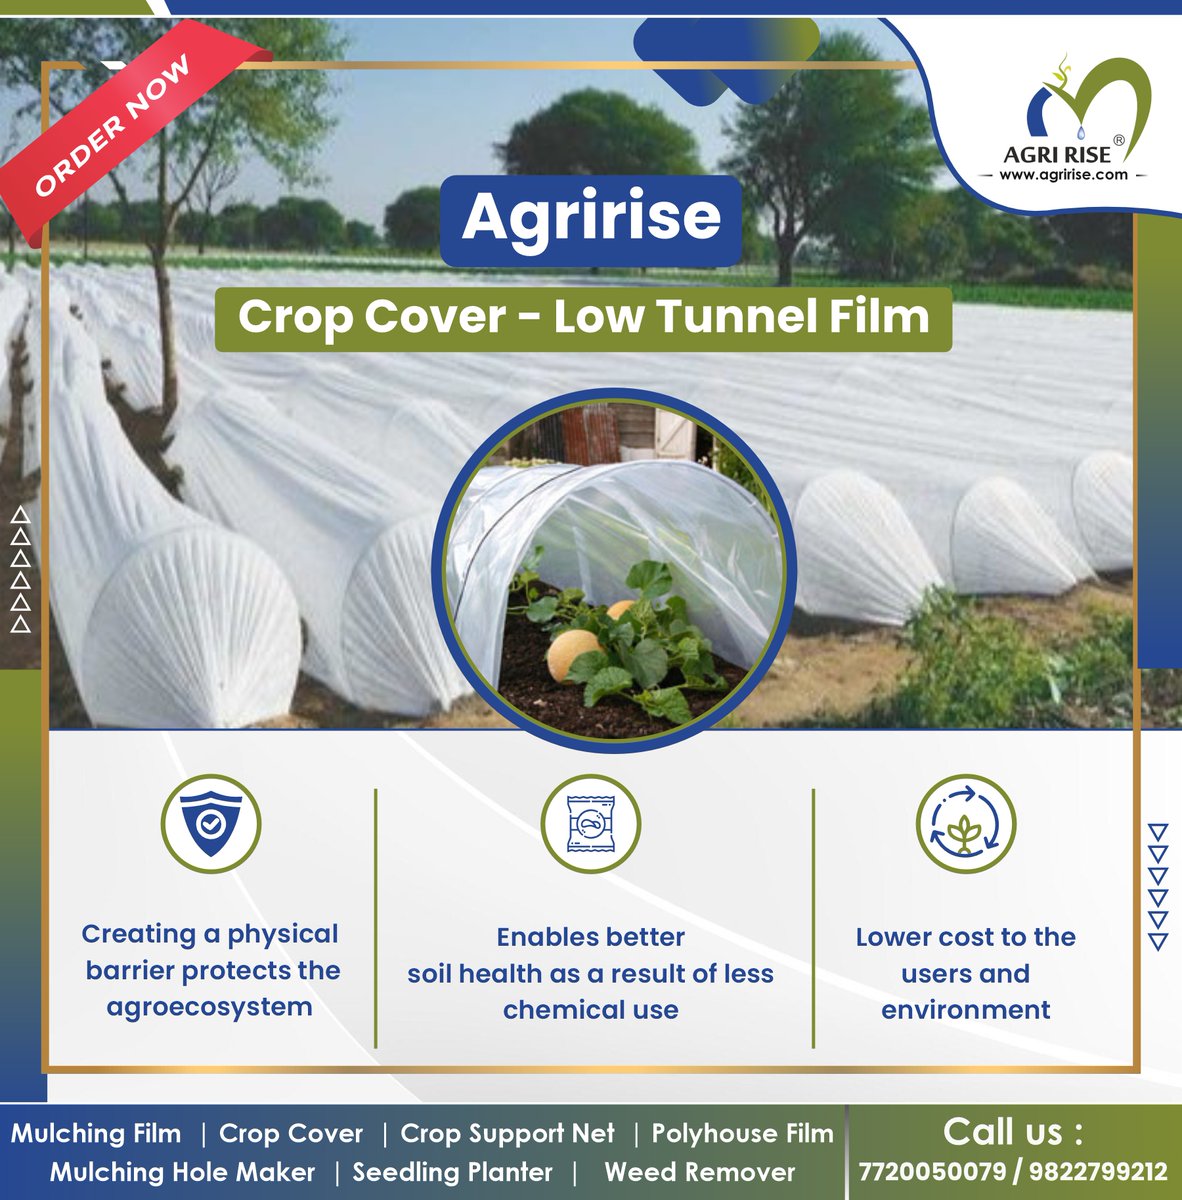 🌱🛡️ Enhance your agroecosystem with AgriRise Crop Cover - Low Tunnel Film! 🌿🎬 Protects, promotes better soil health, and eco-friendly. Call: 7720050079/9822799212 📞 #AgriRise #CropCover #LowTunnelFilm #Agroecosystem #SoilHealth 🚜🌍